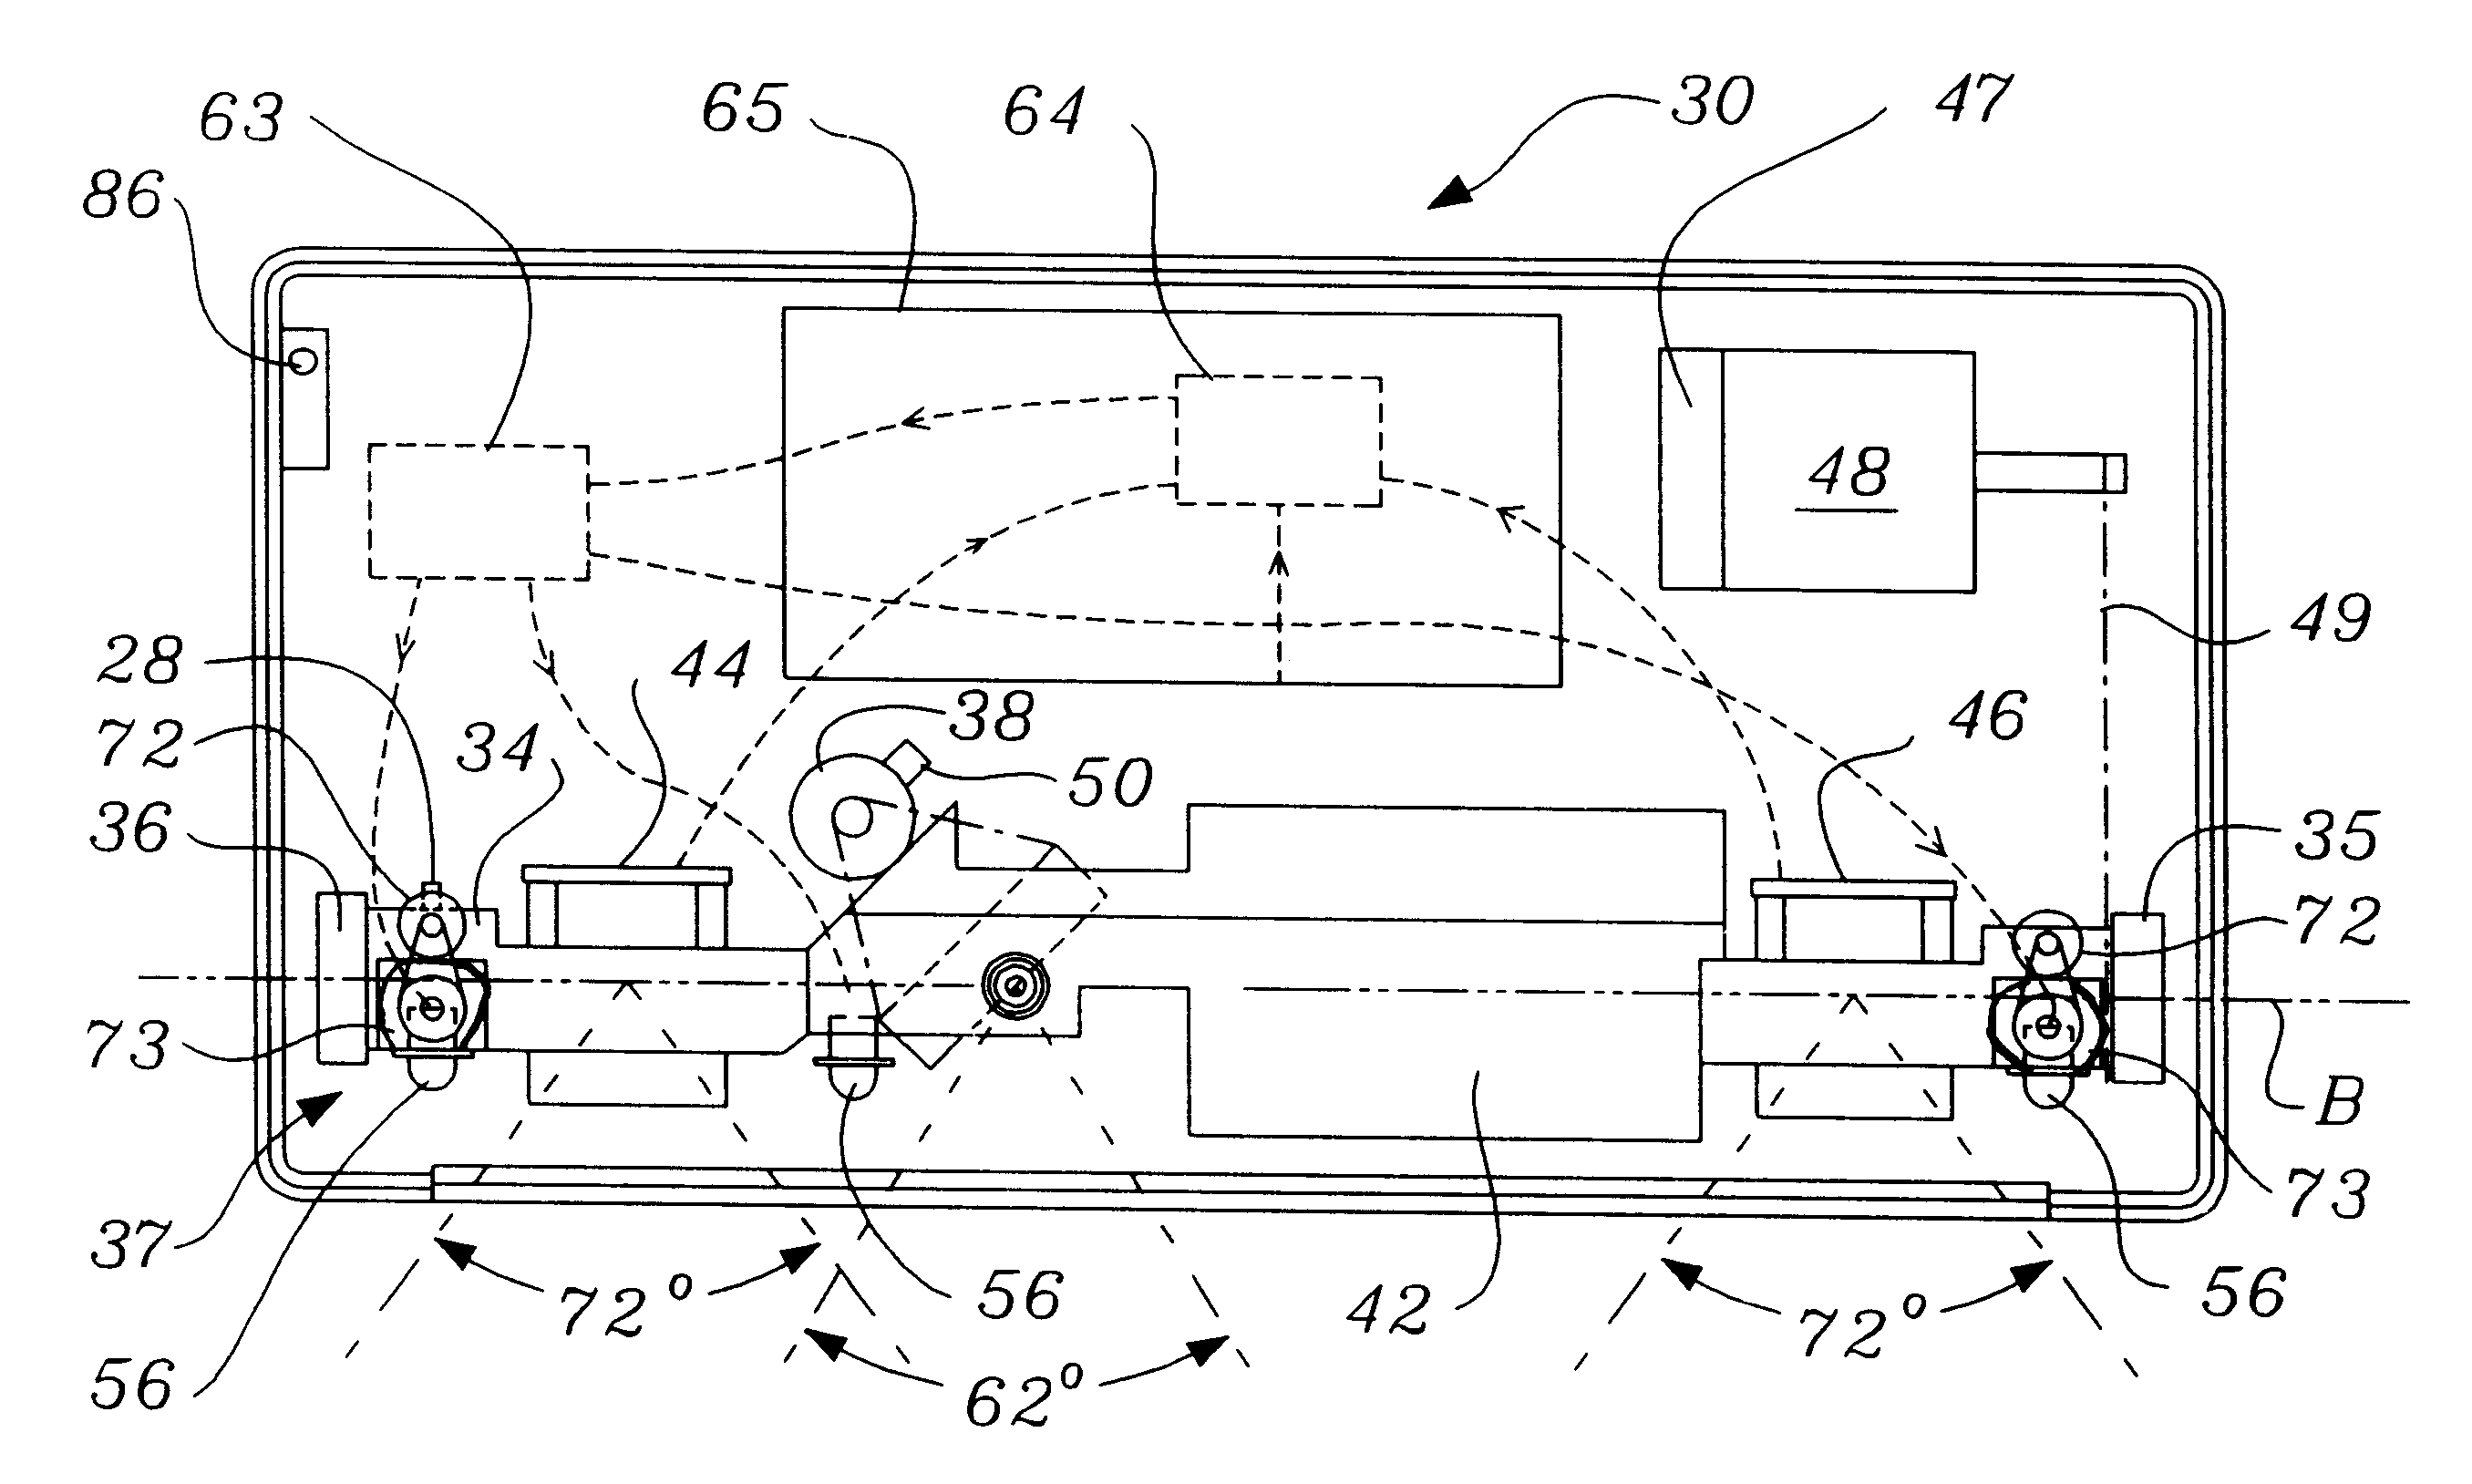 Compact imaging device incorporating rotatably mounted cameras